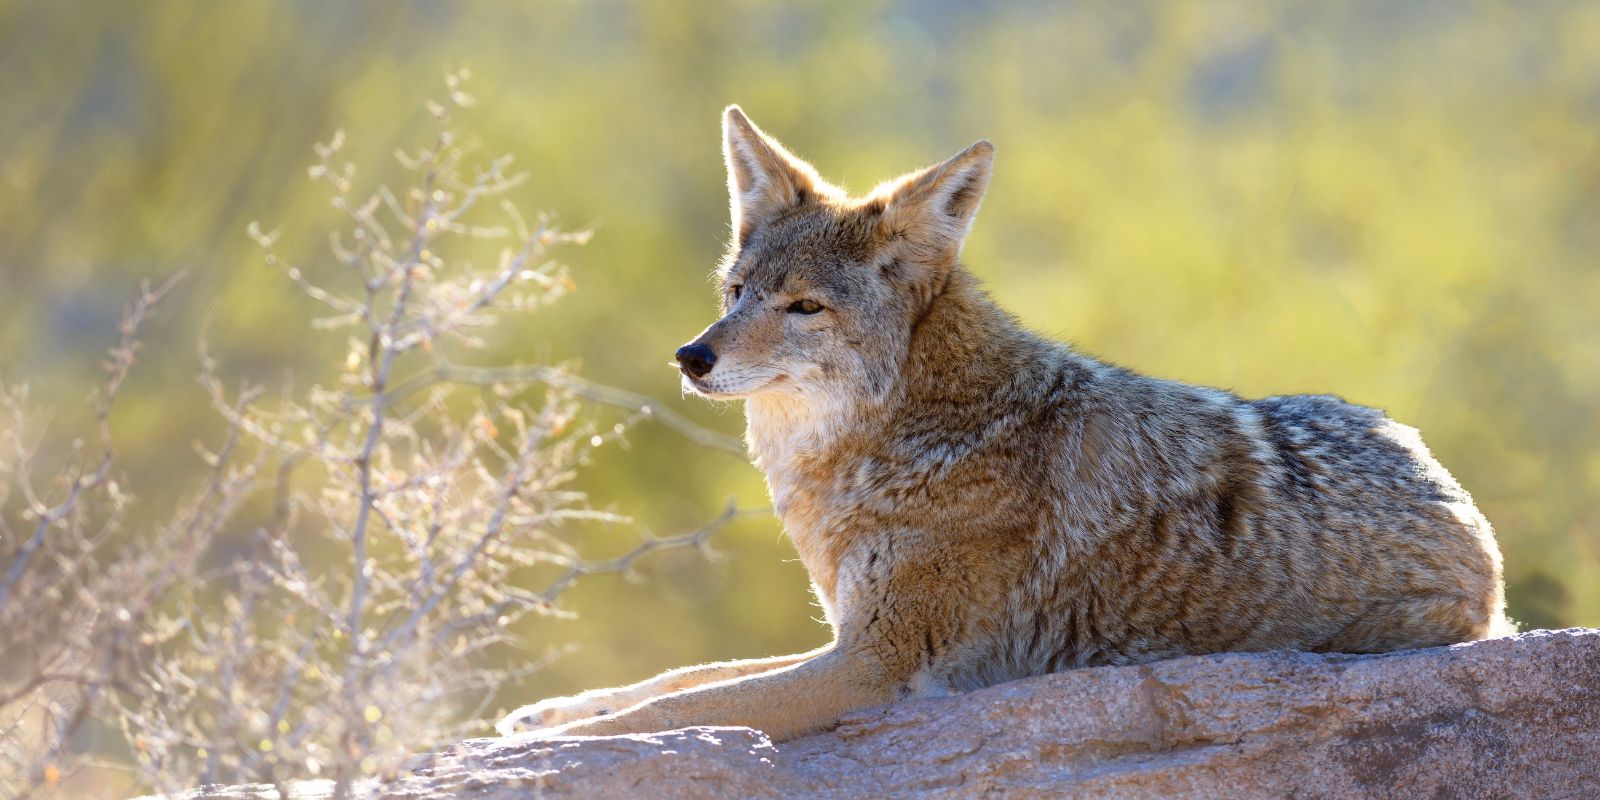 Coyote sitting on a rock